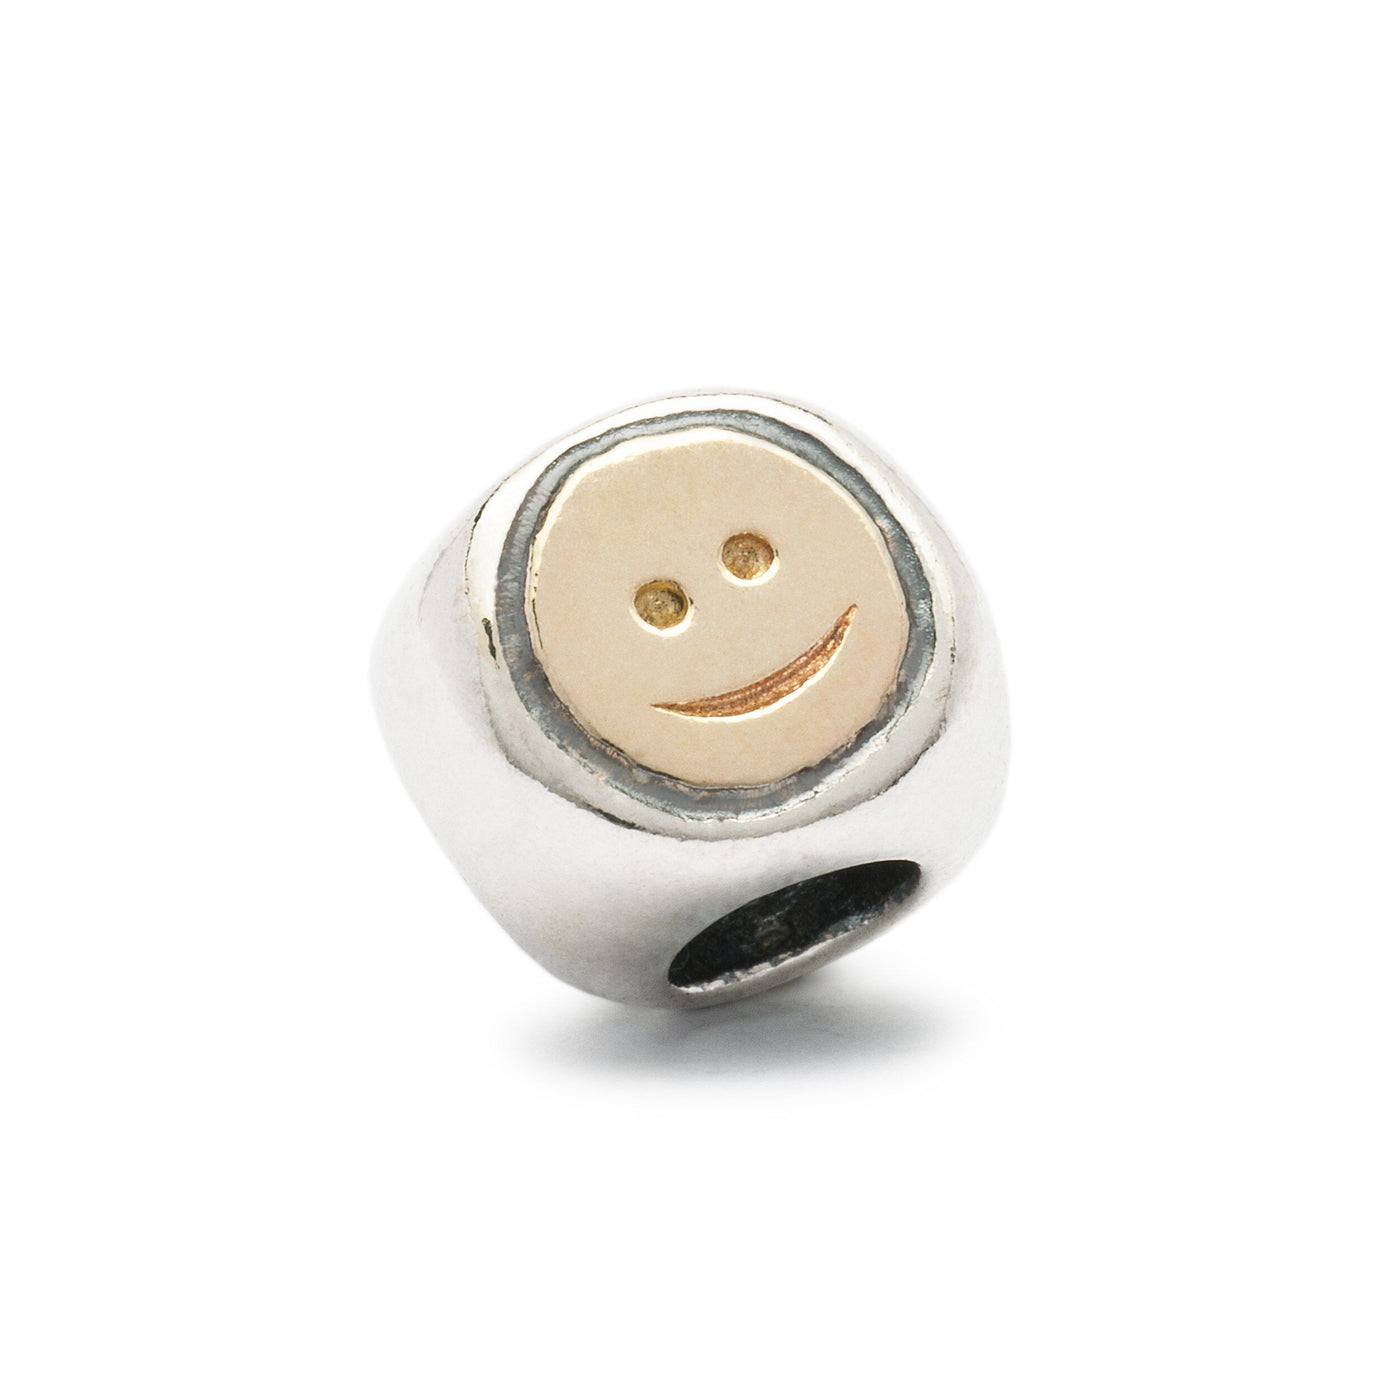 Pursuit of Happiness - Trollbeads Canada